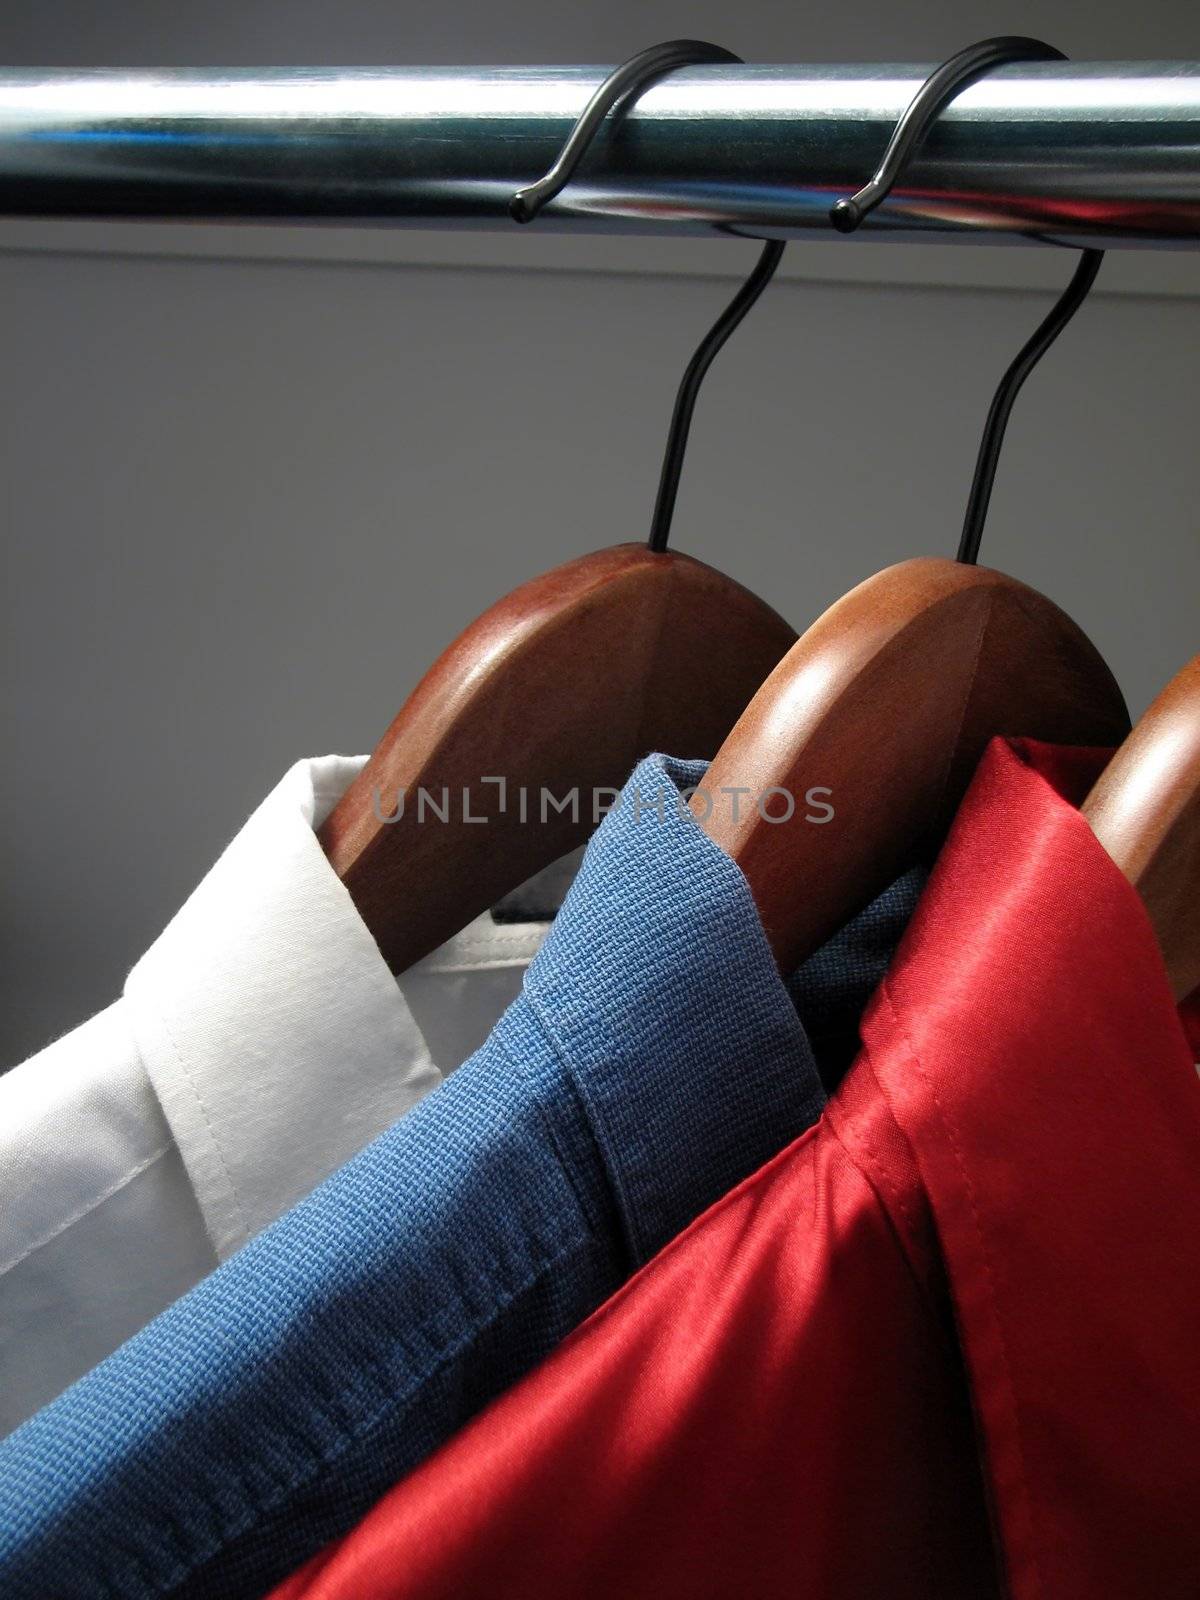 Colors of Russian flag: white, blue and red shirts on wooden hangers.